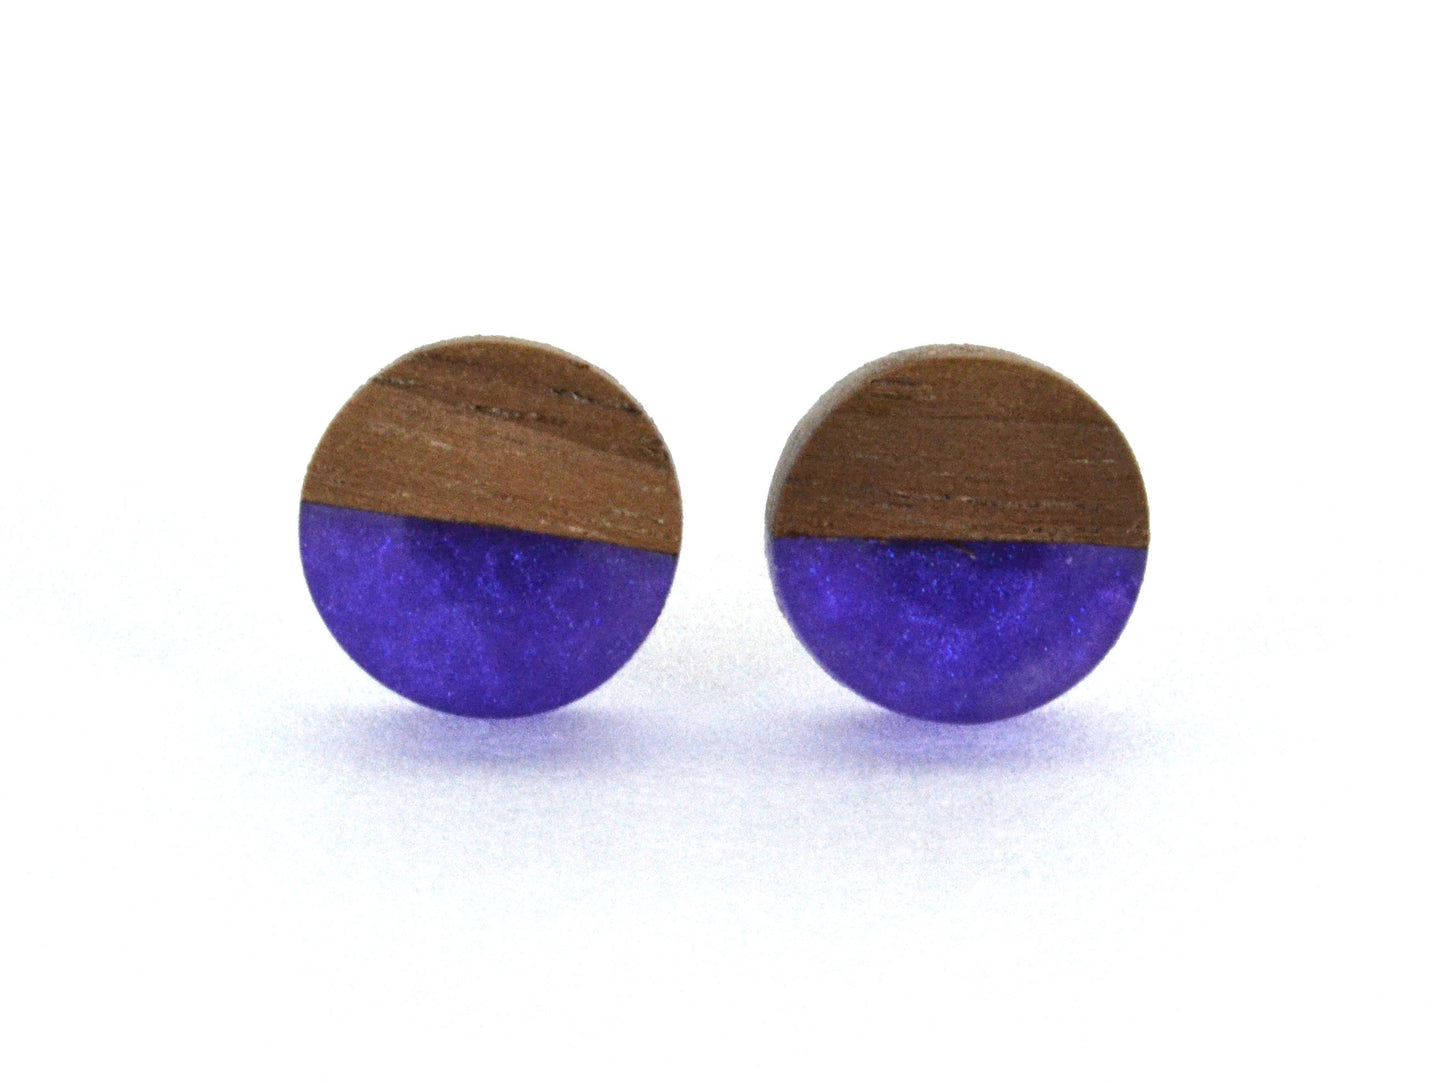 natural walnut wood earrings, minimal design with purple accent